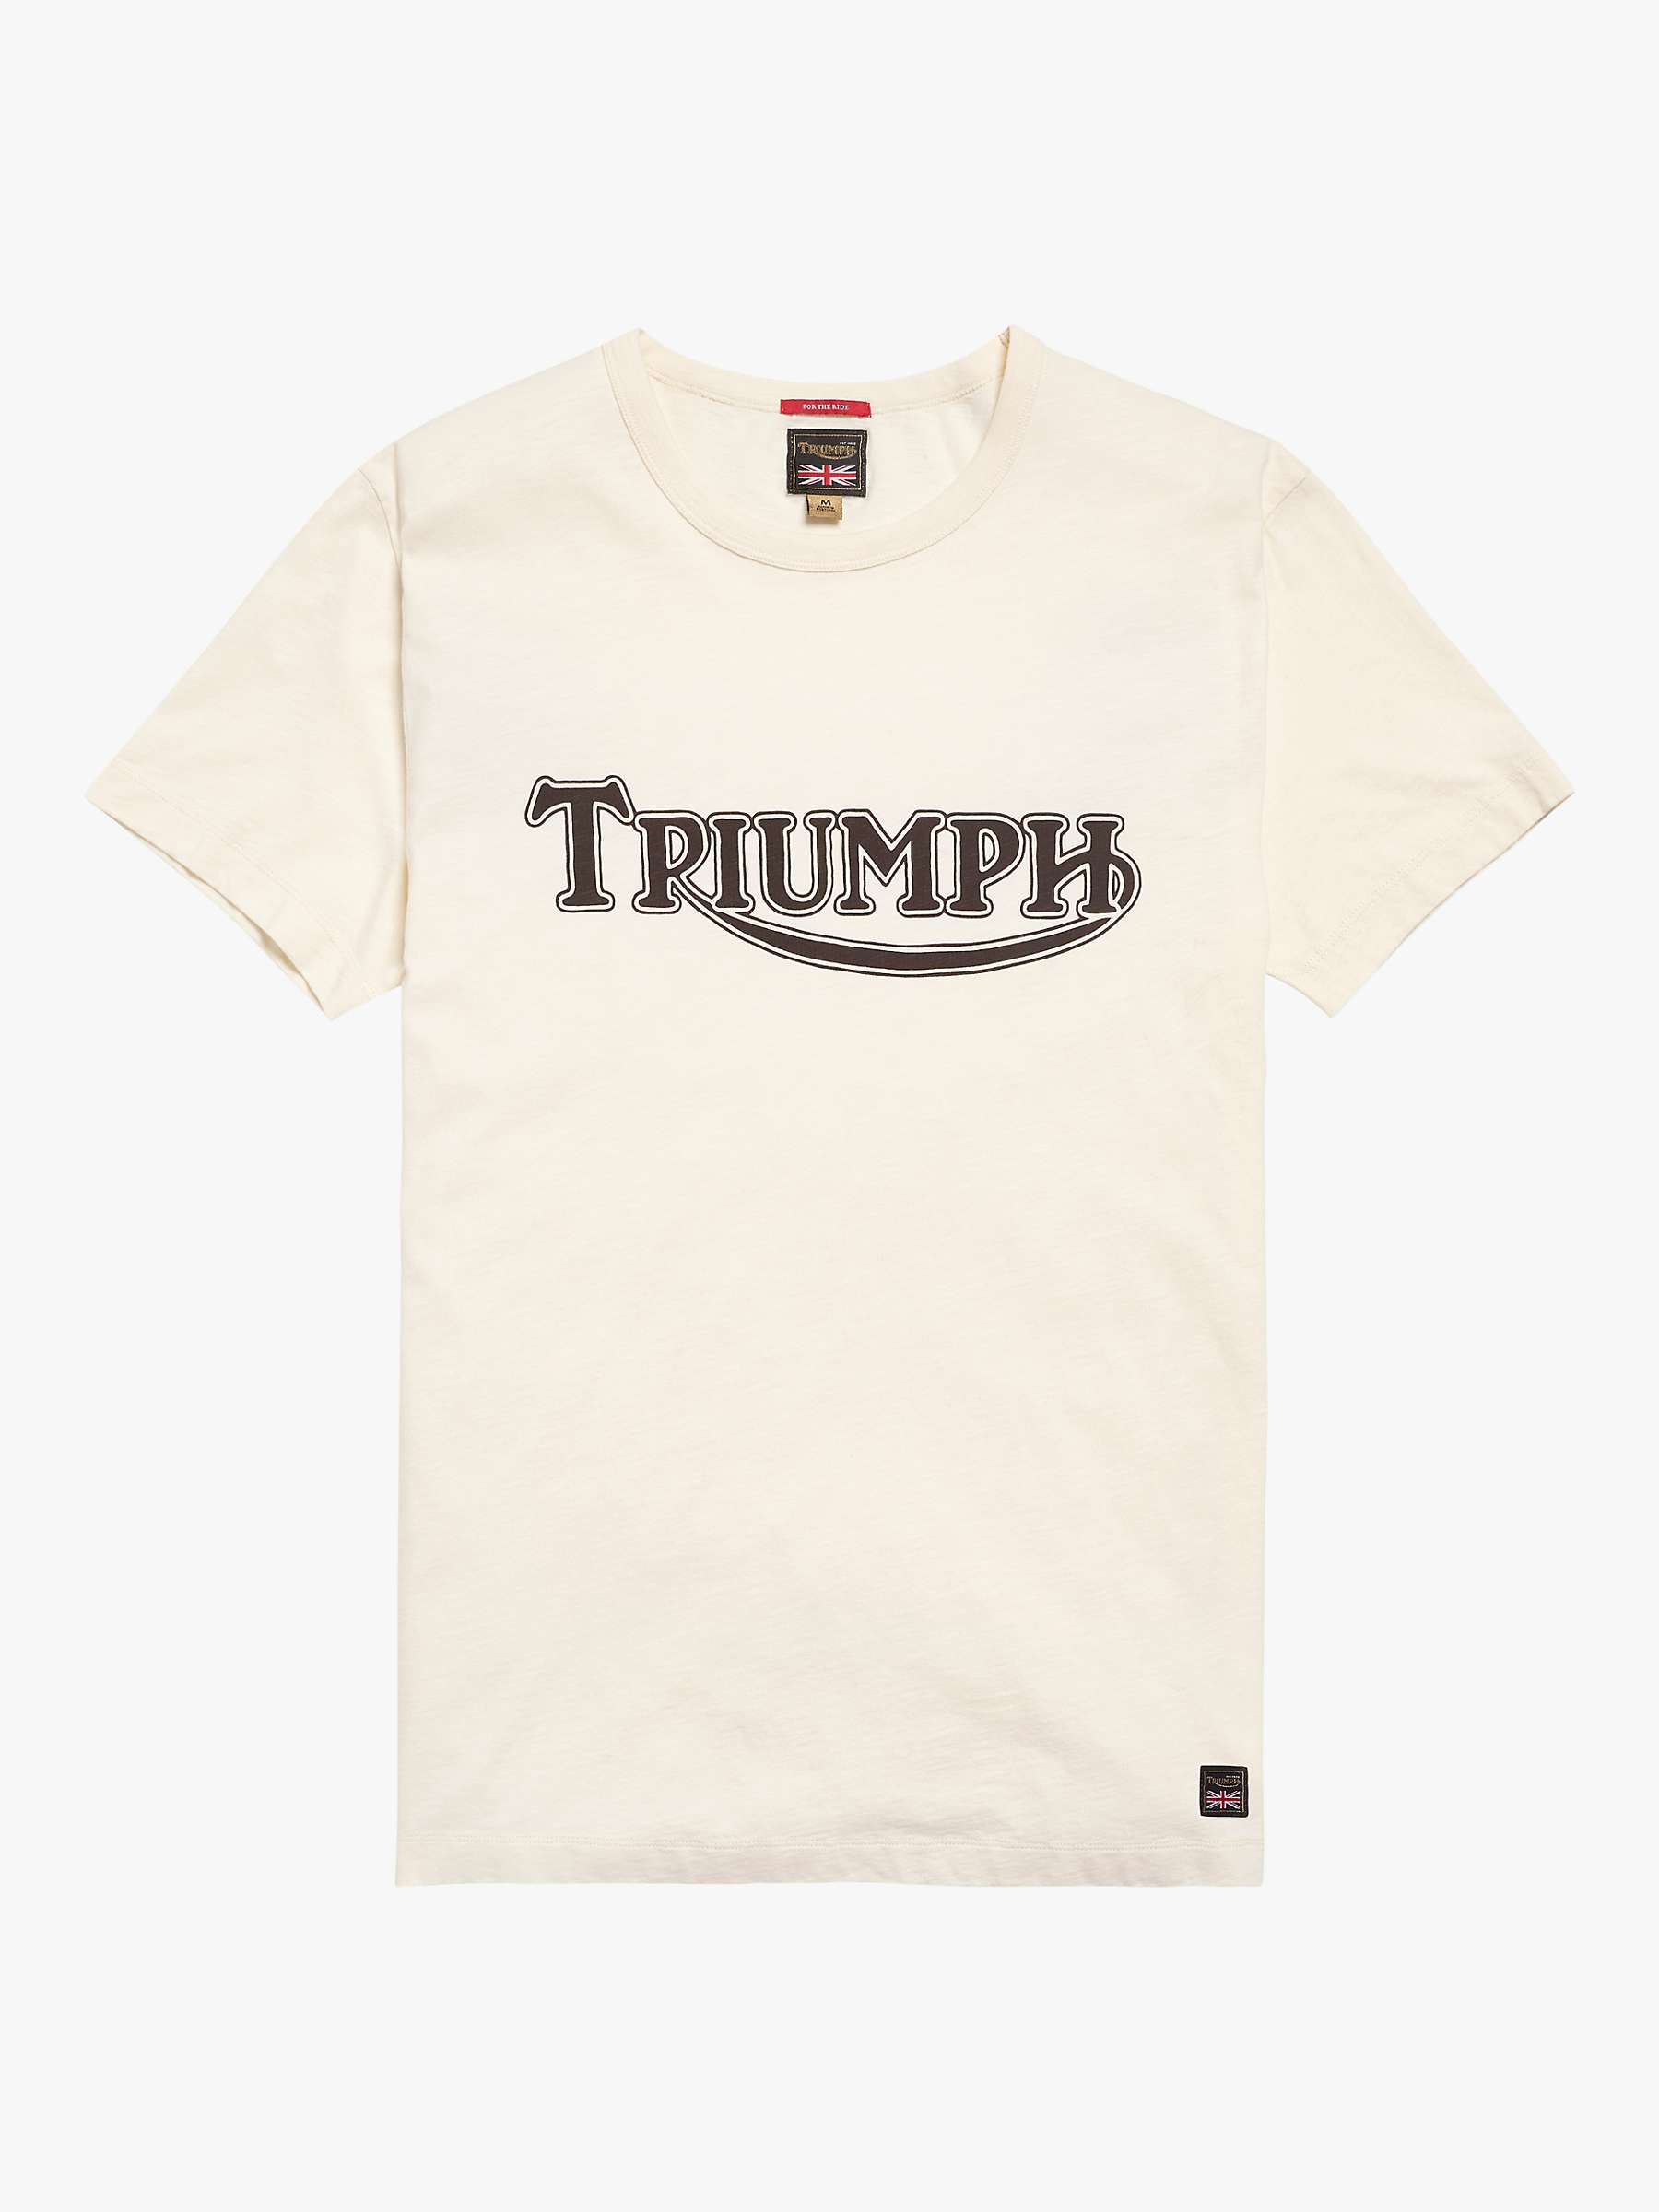 Buy Triumph Motorcycles Fork Seal T-Shirt Online at johnlewis.com